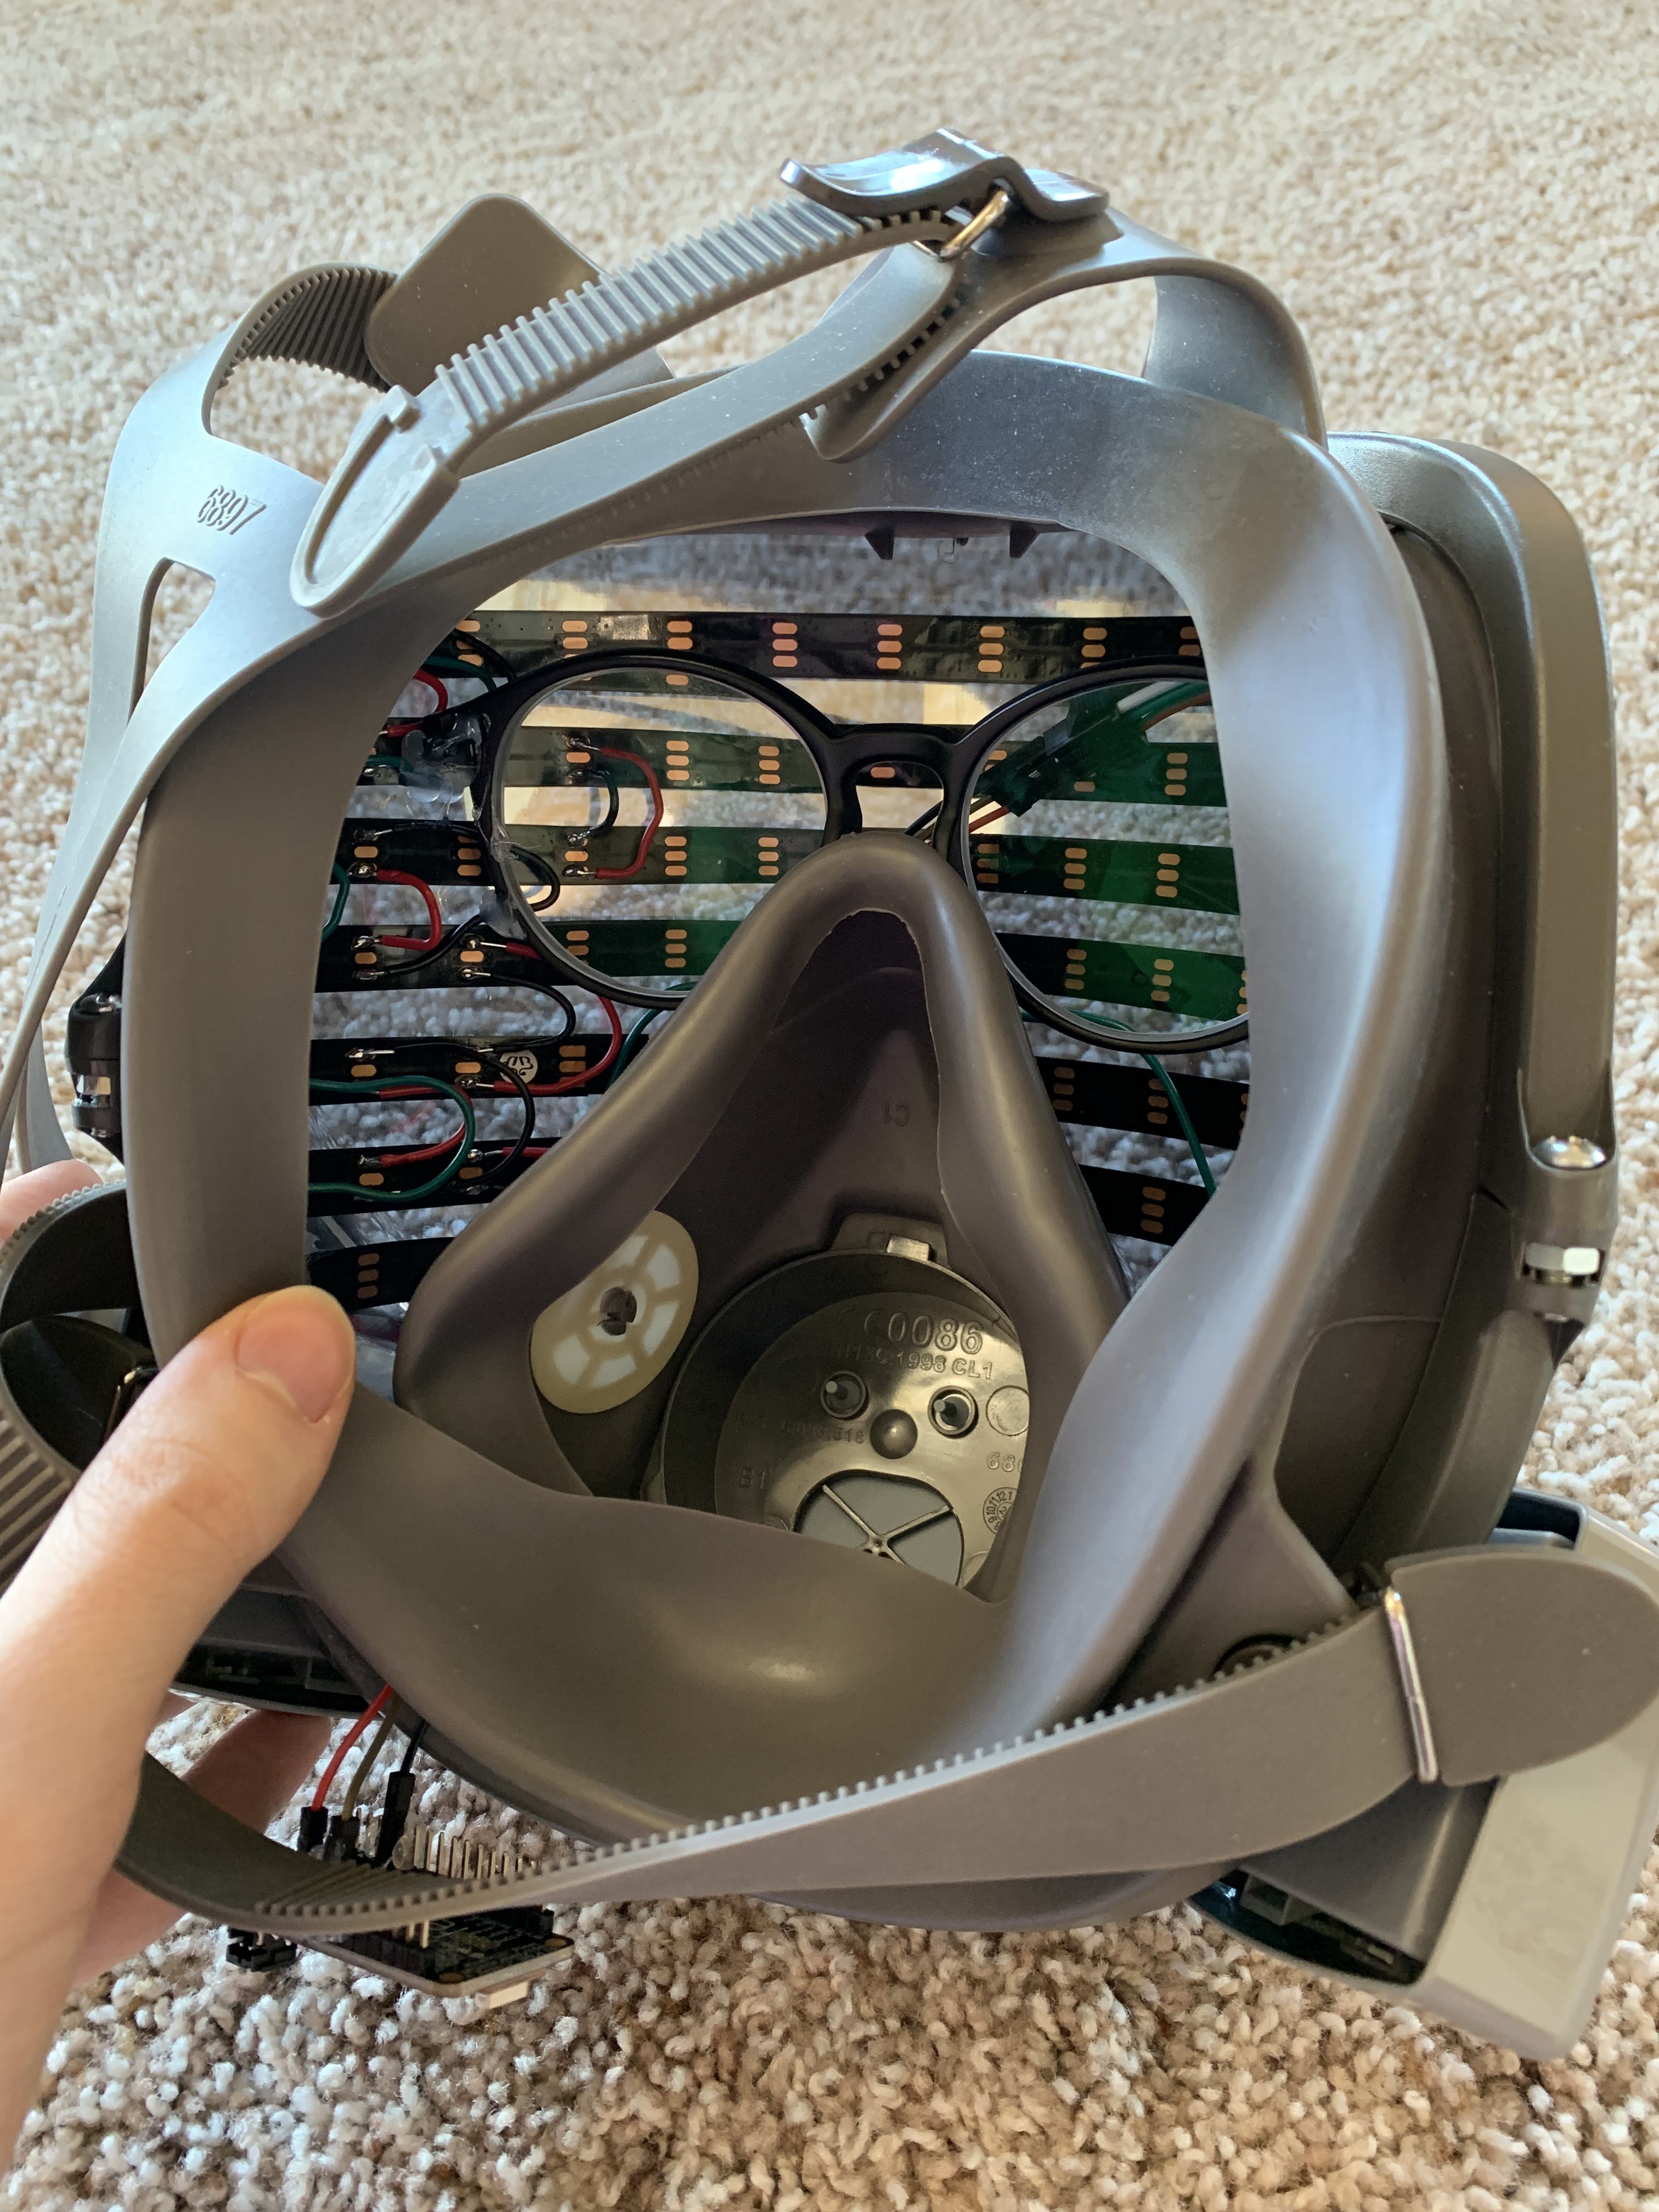 The inside of my LED respirator mask, showing the LED strips and a pair of glasses glued inside.